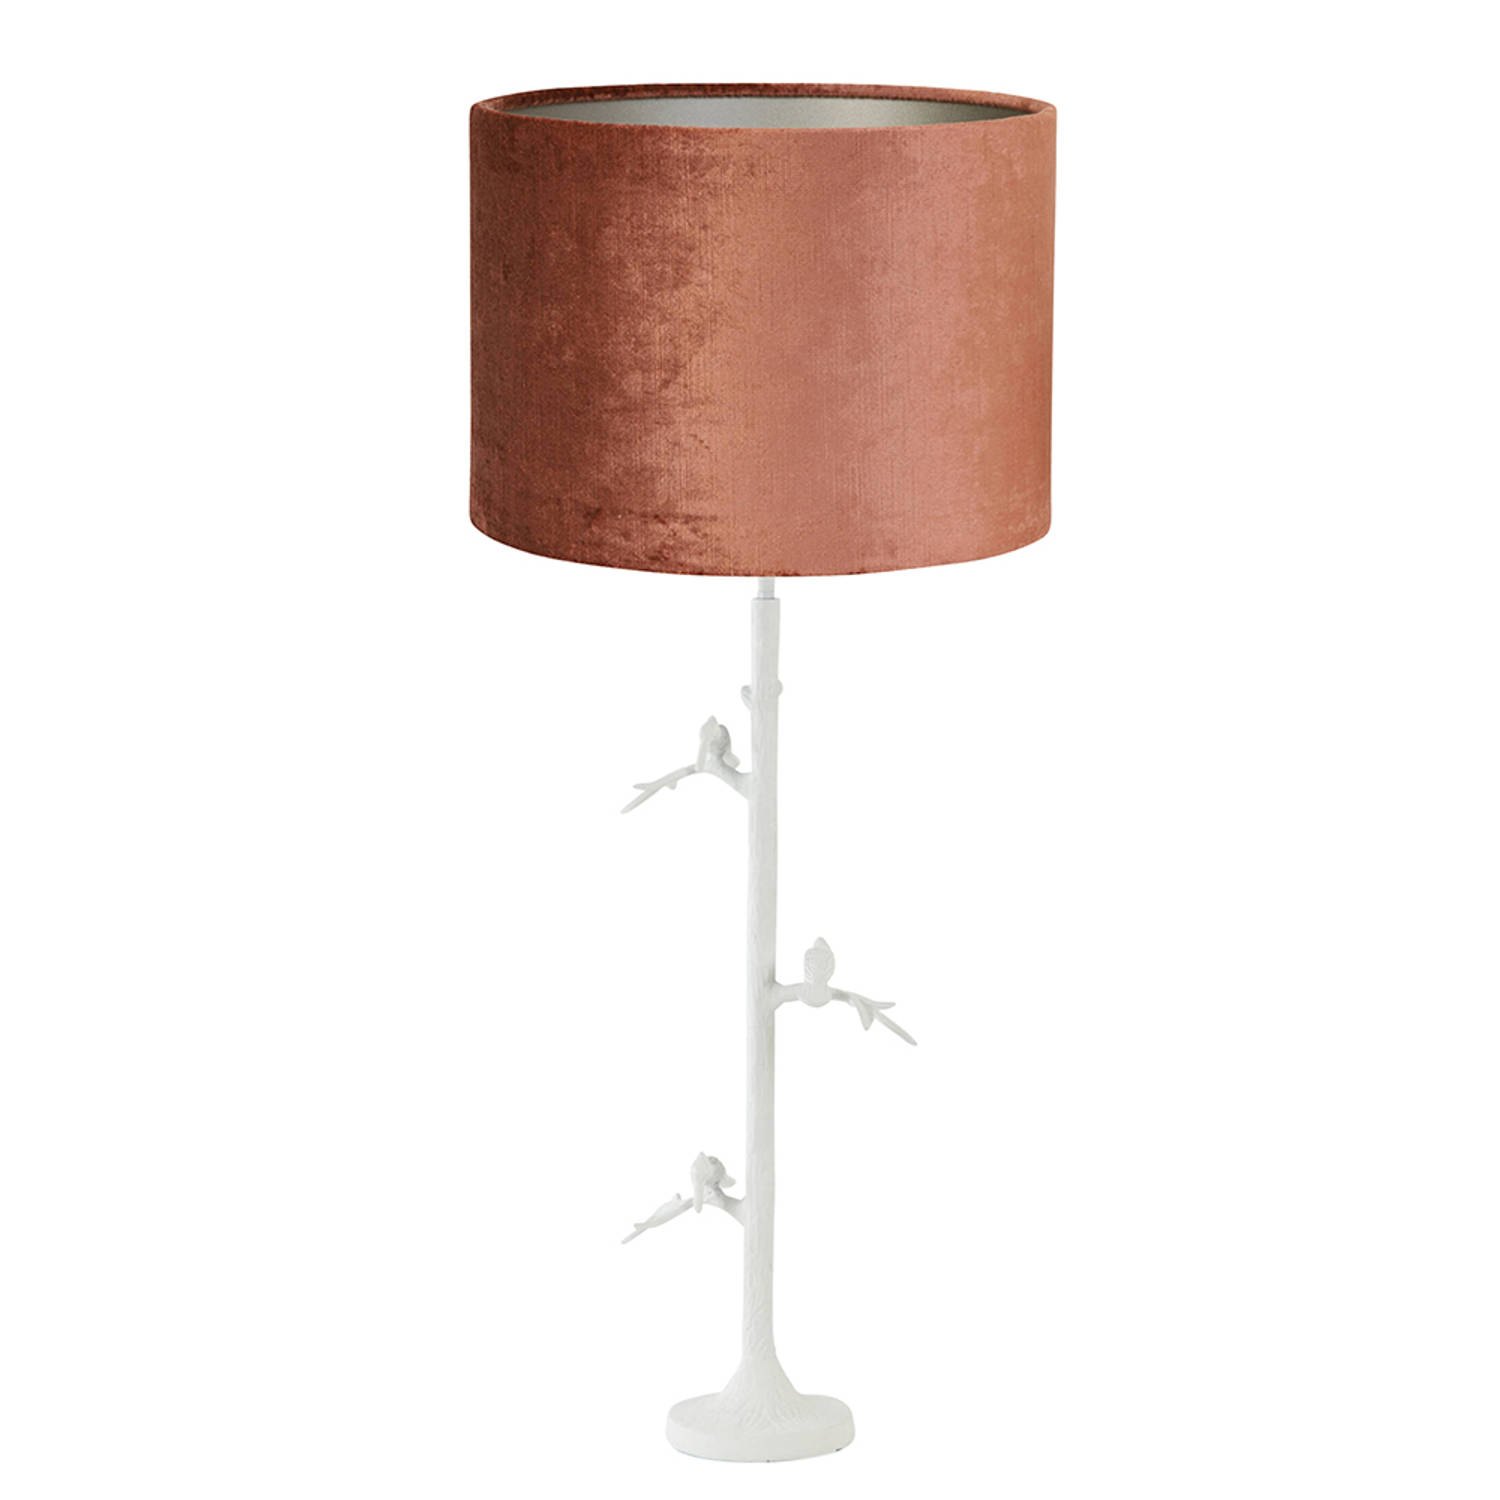 Light and Living Branch tafellamp - Ø 40 cm - E27 (grote fitting) - rood